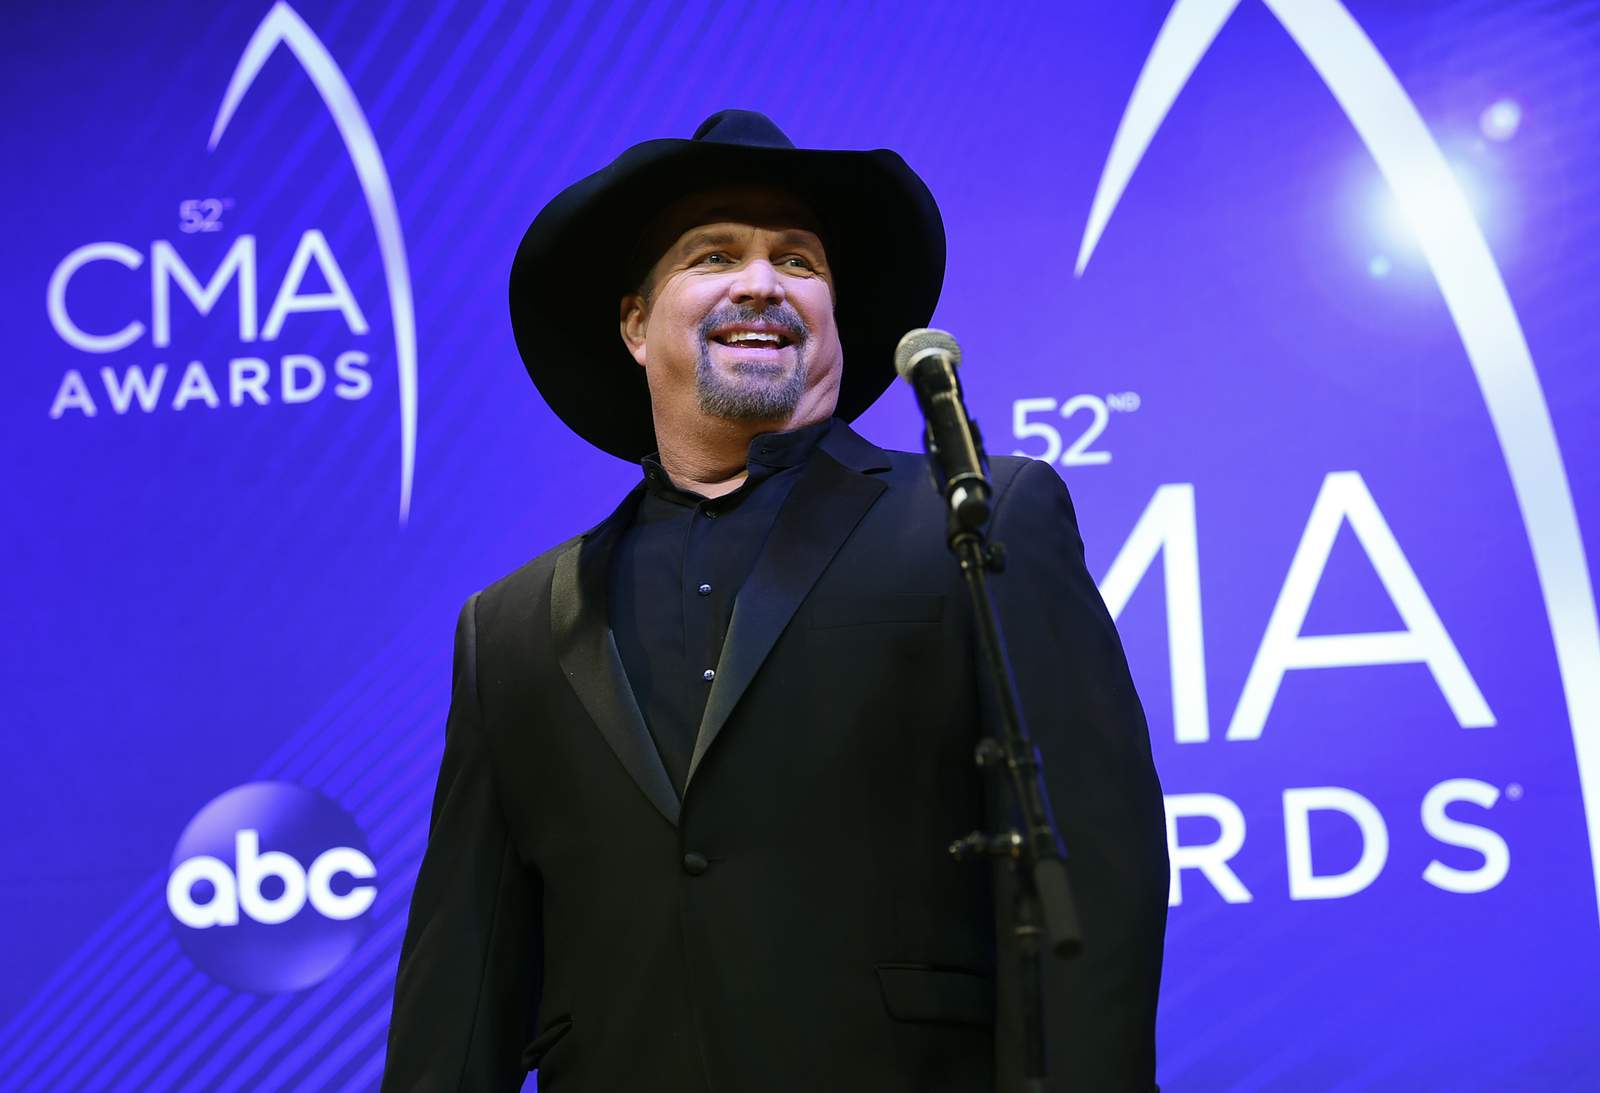 Garth Brooks joins lineup of entertainers at Biden inaugural